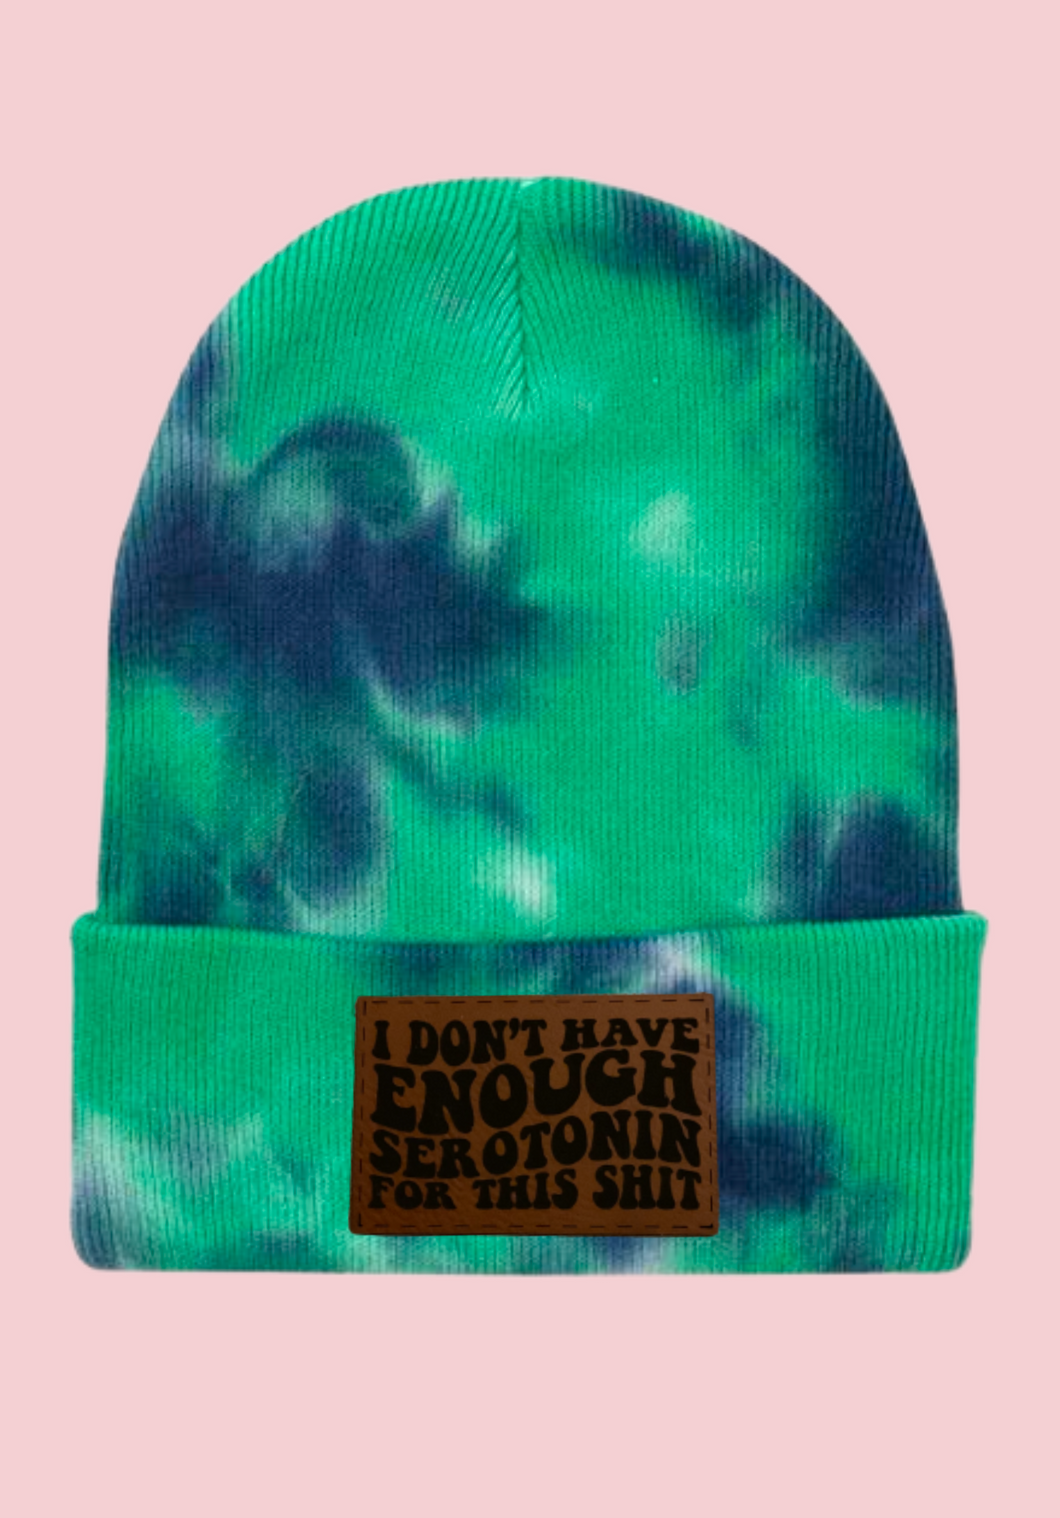 I don’t have enough serotonin for this shit hat/beanie